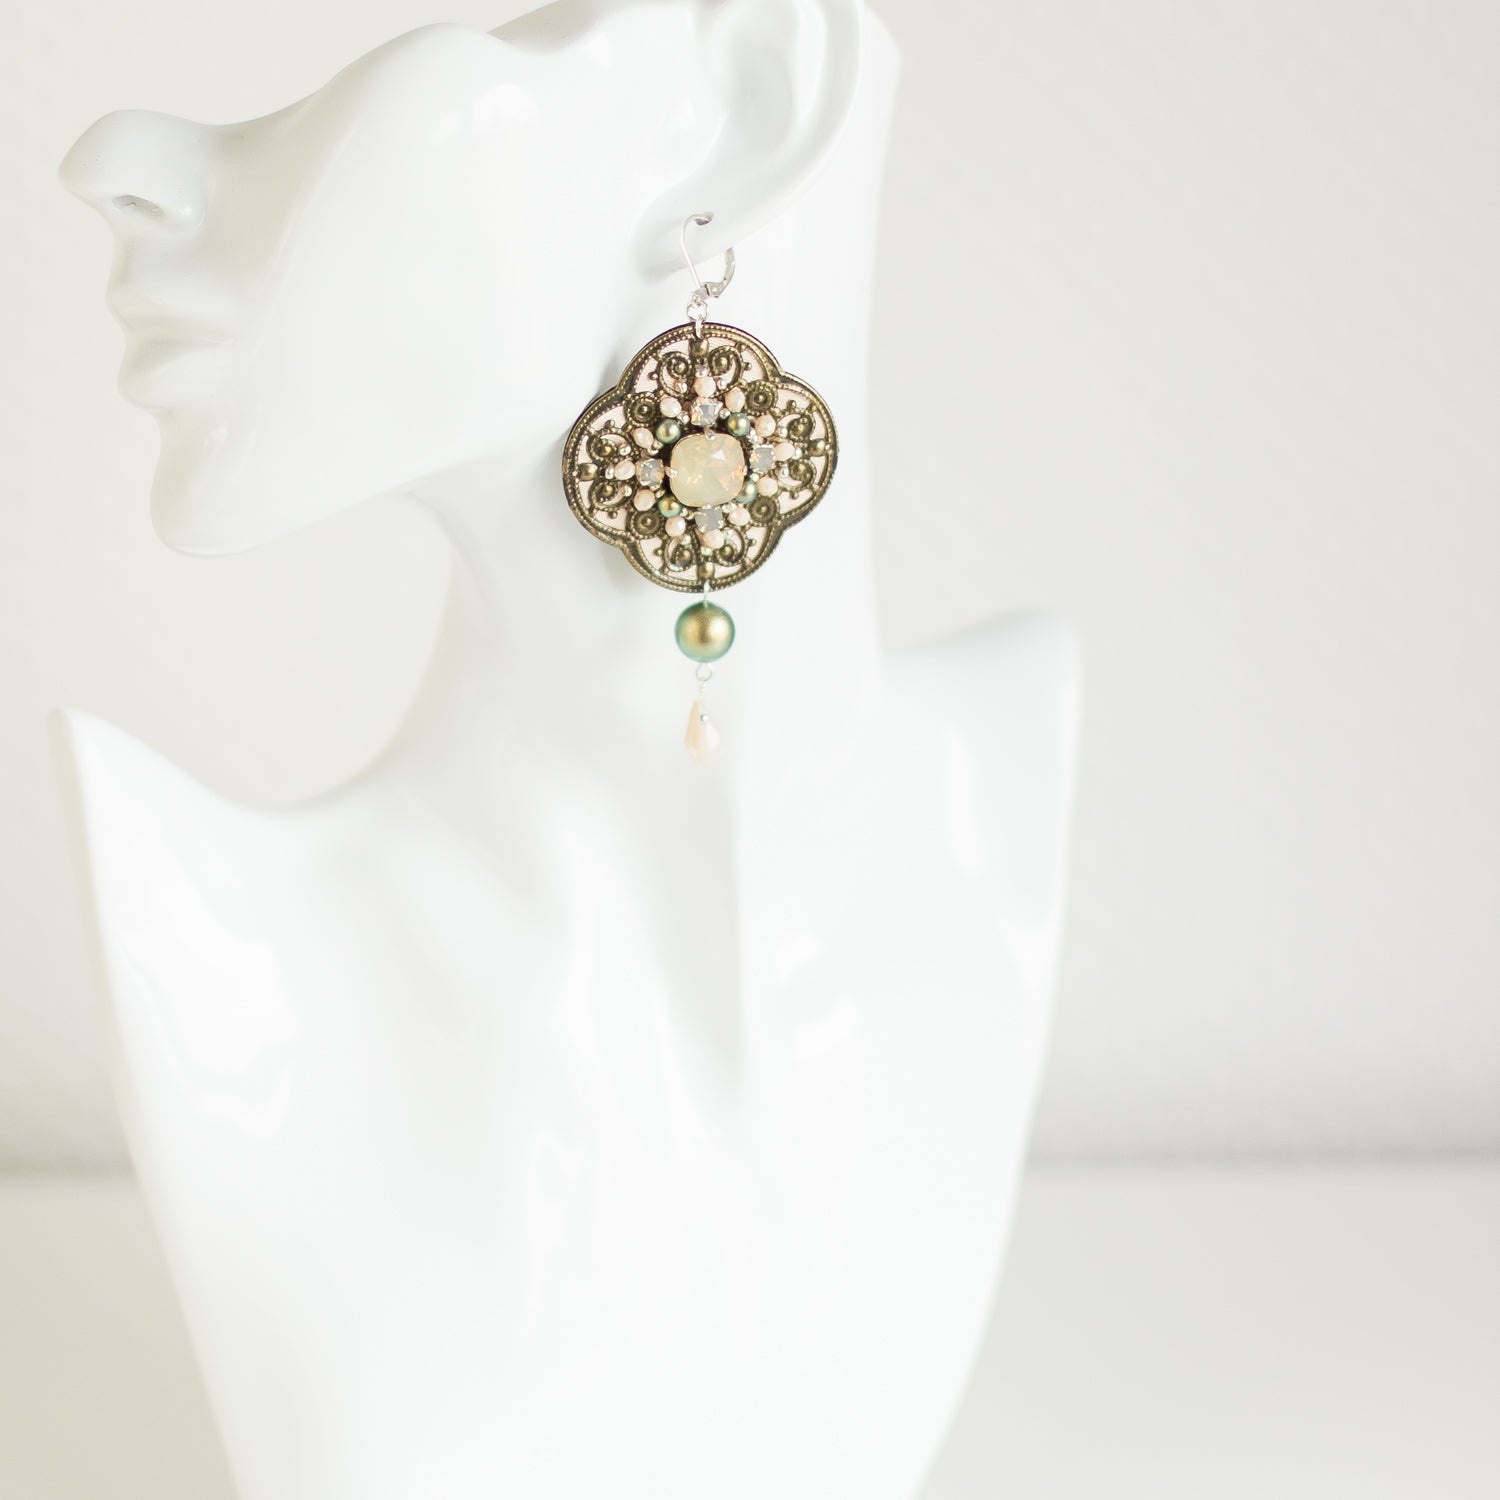 Brass earrings. Sand opal crystal and earrings. Hand embroidered accessories - a wearable work of art. one of a kind jewelry